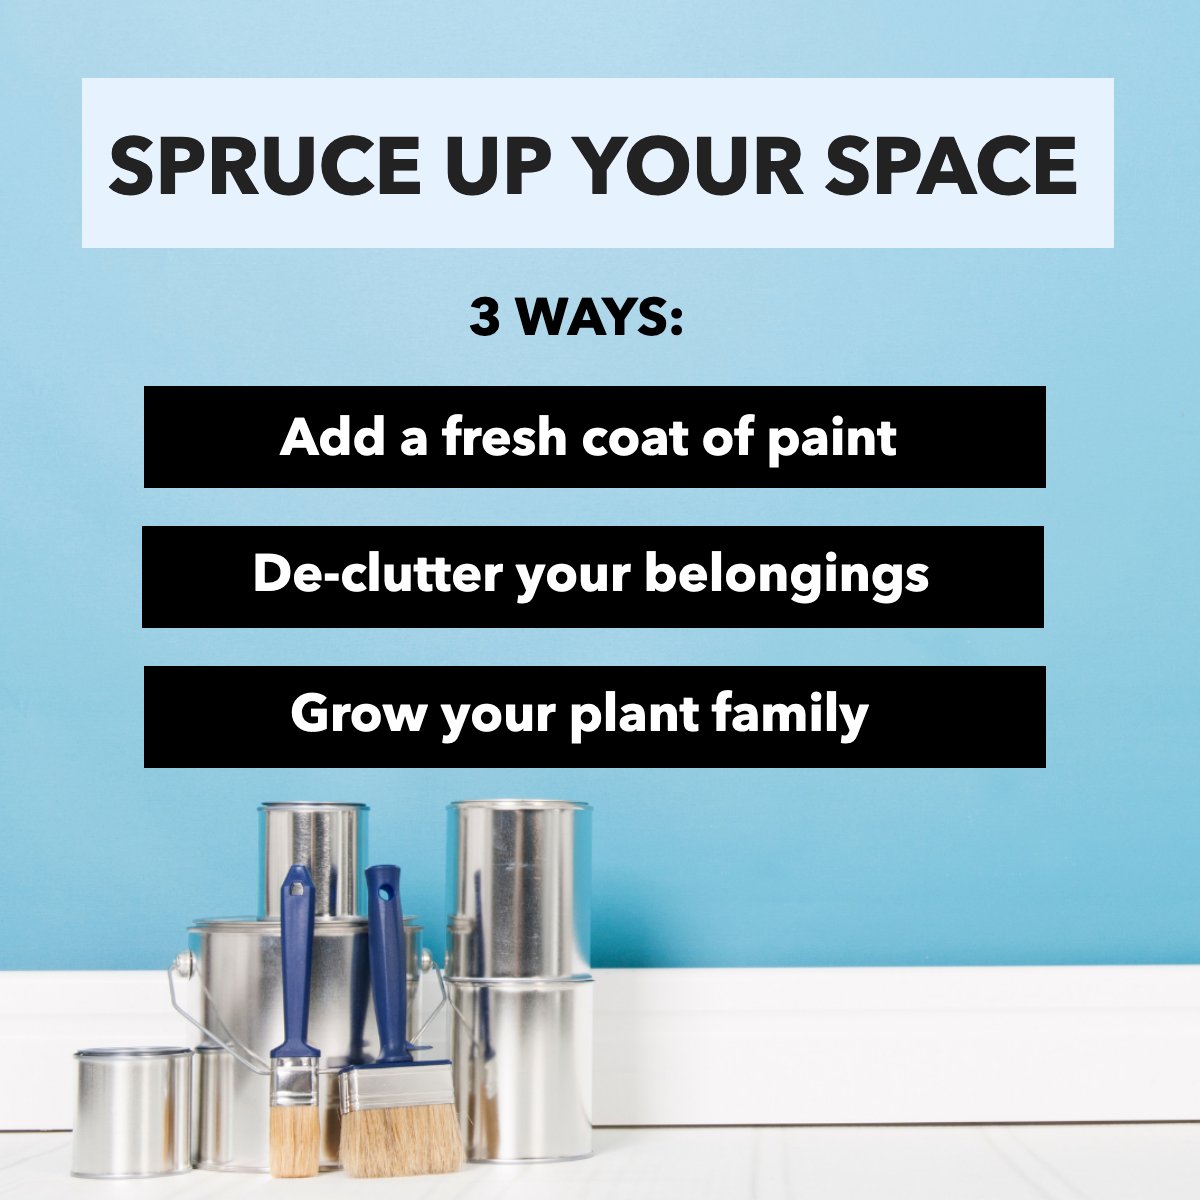 Find out 3 ways to give a fresh look to your spaces. 

#spruceupyourspace #spruceupyourhome #spruceuptheplace #freshpaint
 #shared